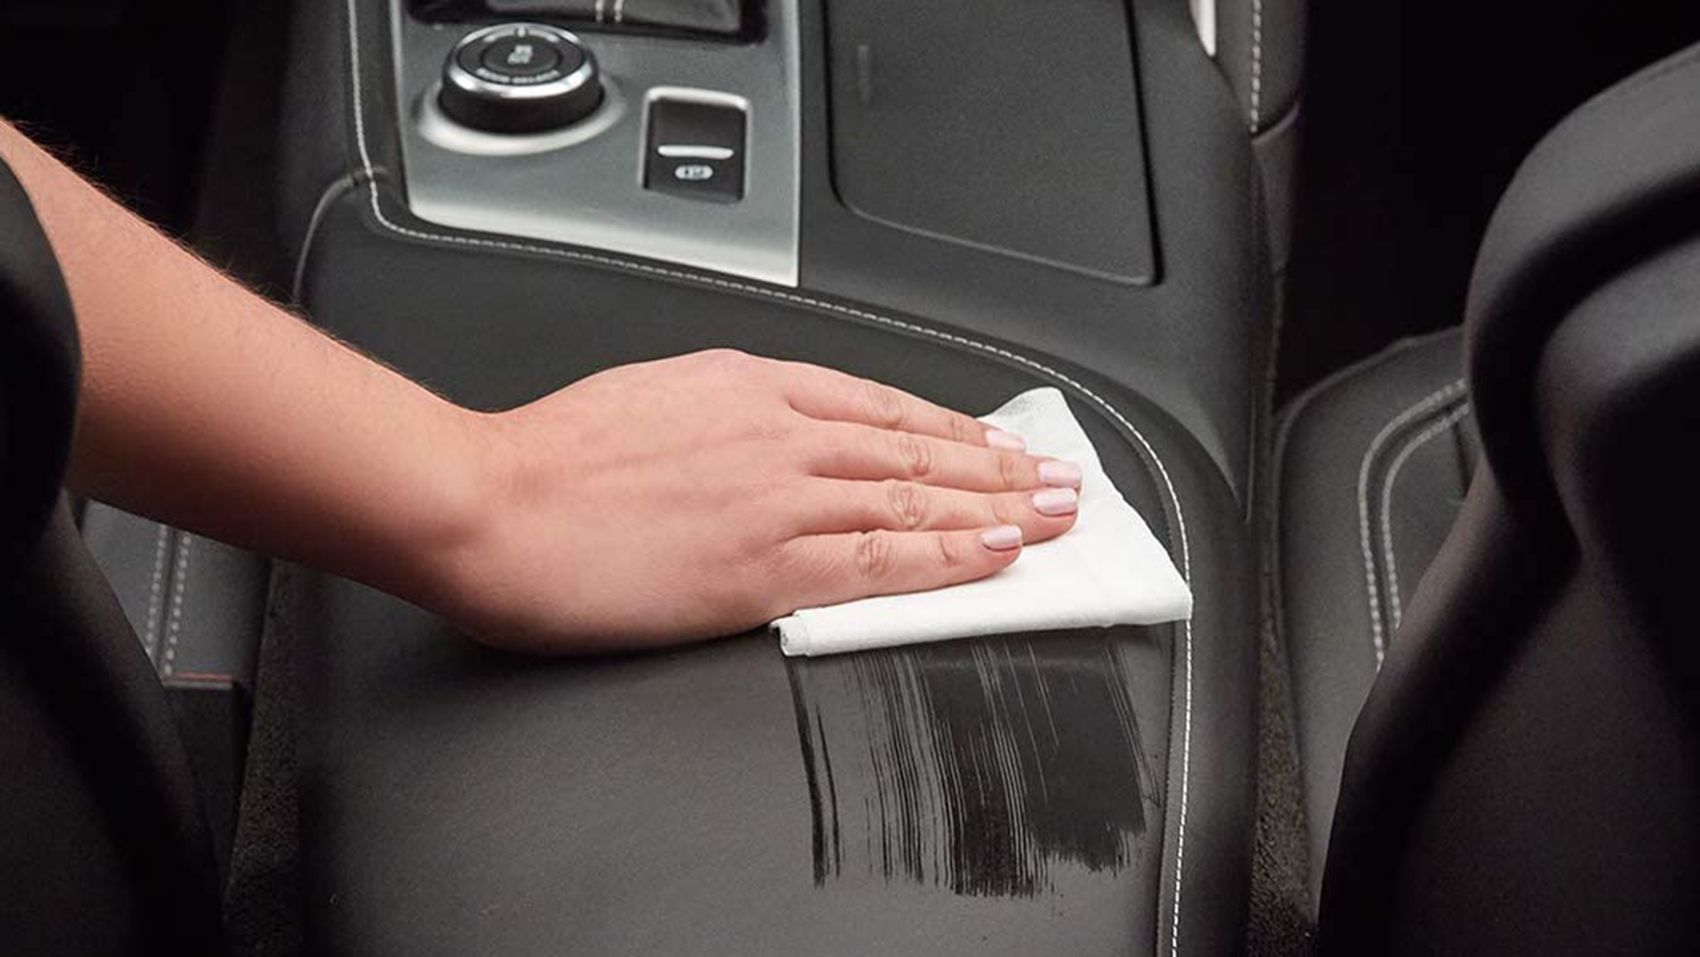 20 products under $25 to keep your car clean and organized